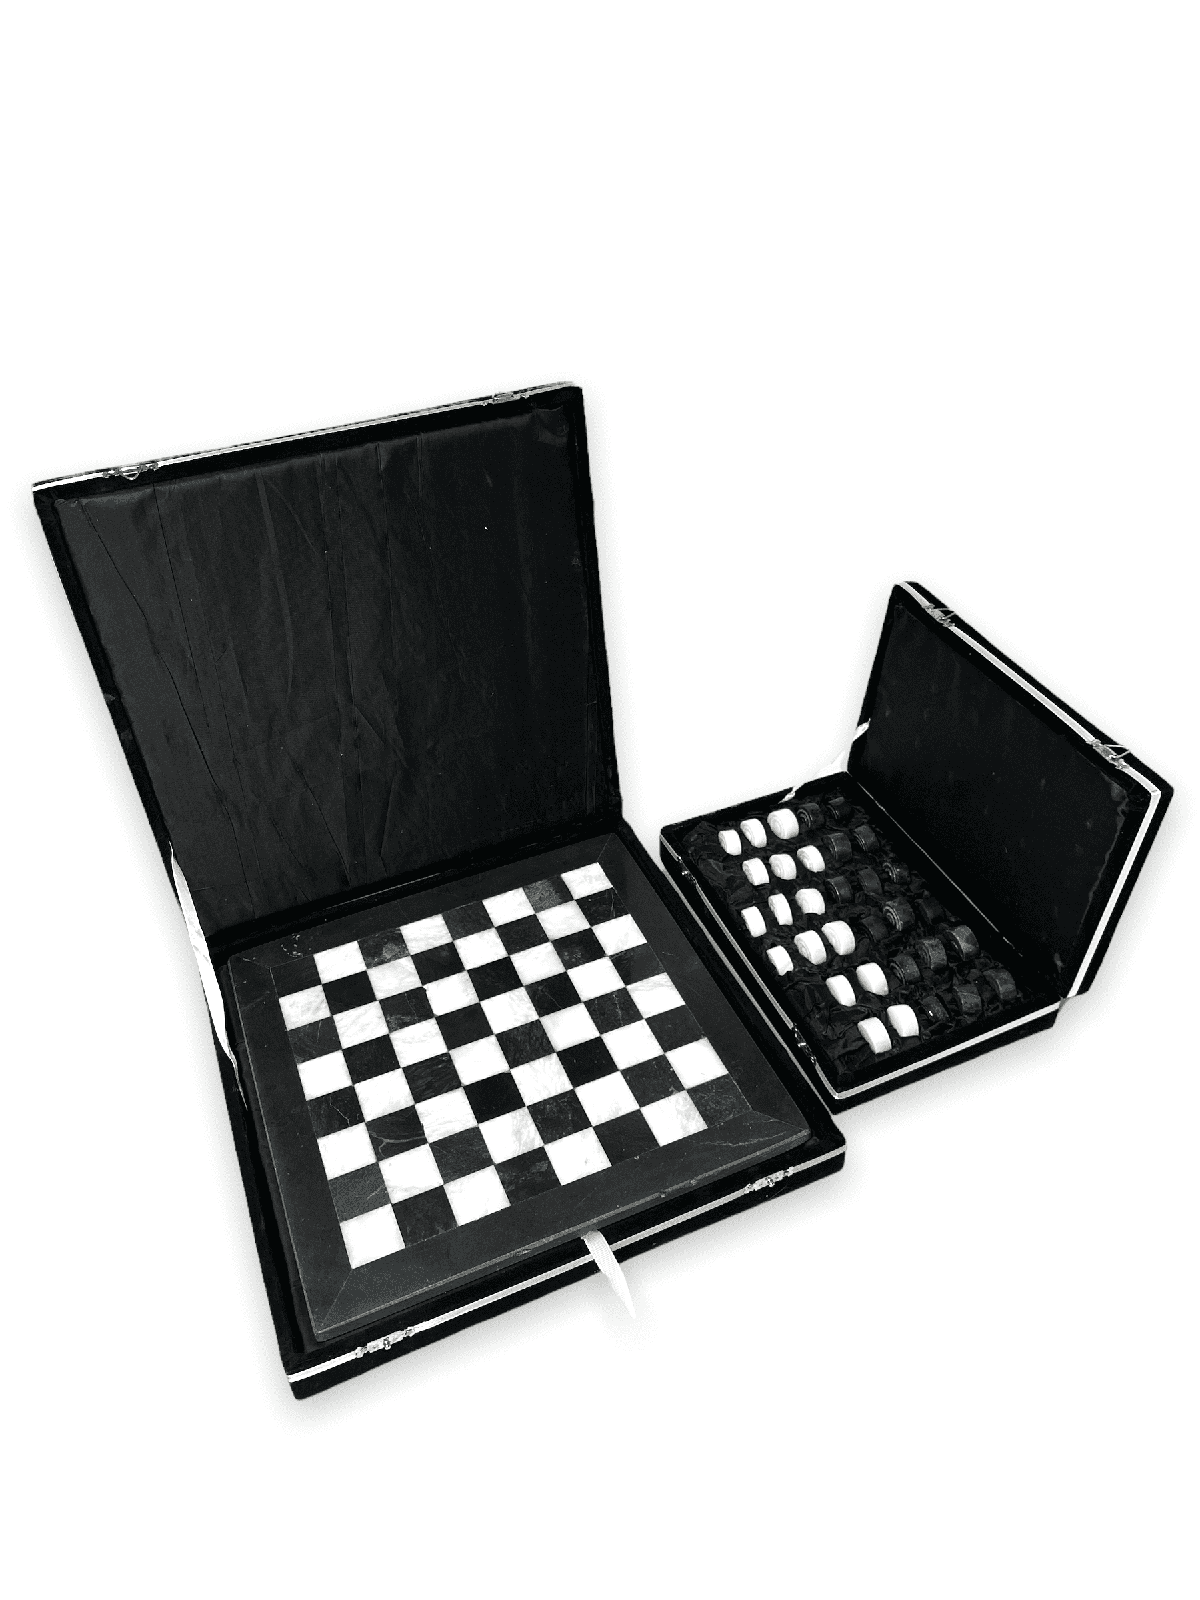 Marble Checkers Set with Storage Case - Black and White - Marble Cultures